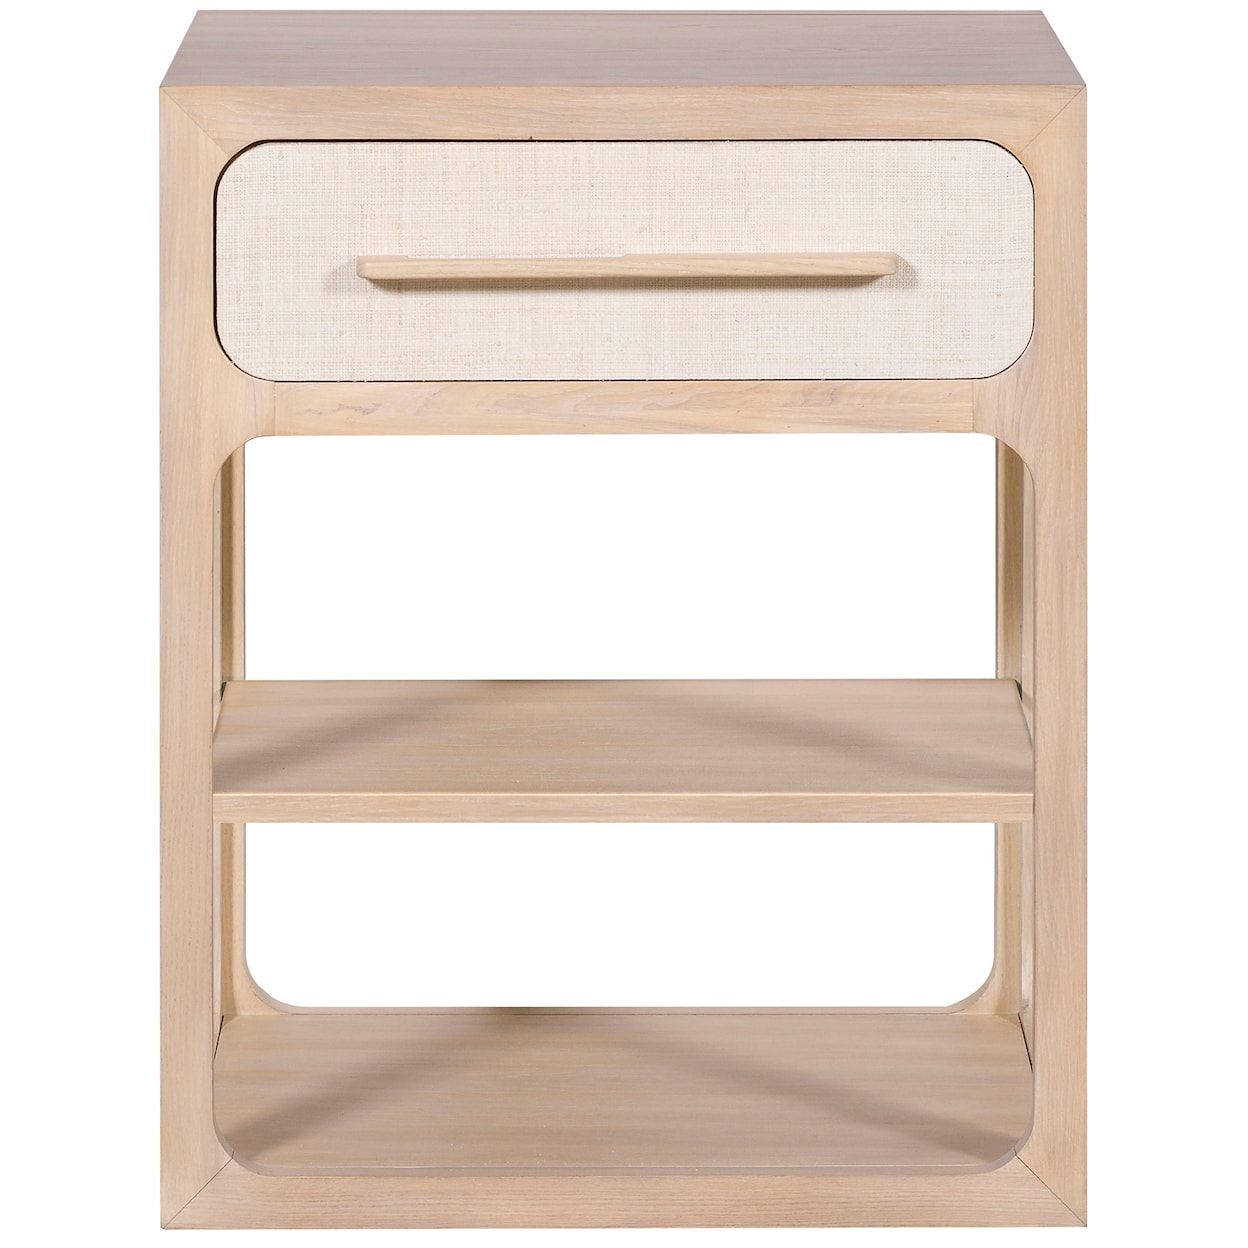 Vanguard Furniture Reveal Nightstand with 2 Shelves and a Drawer